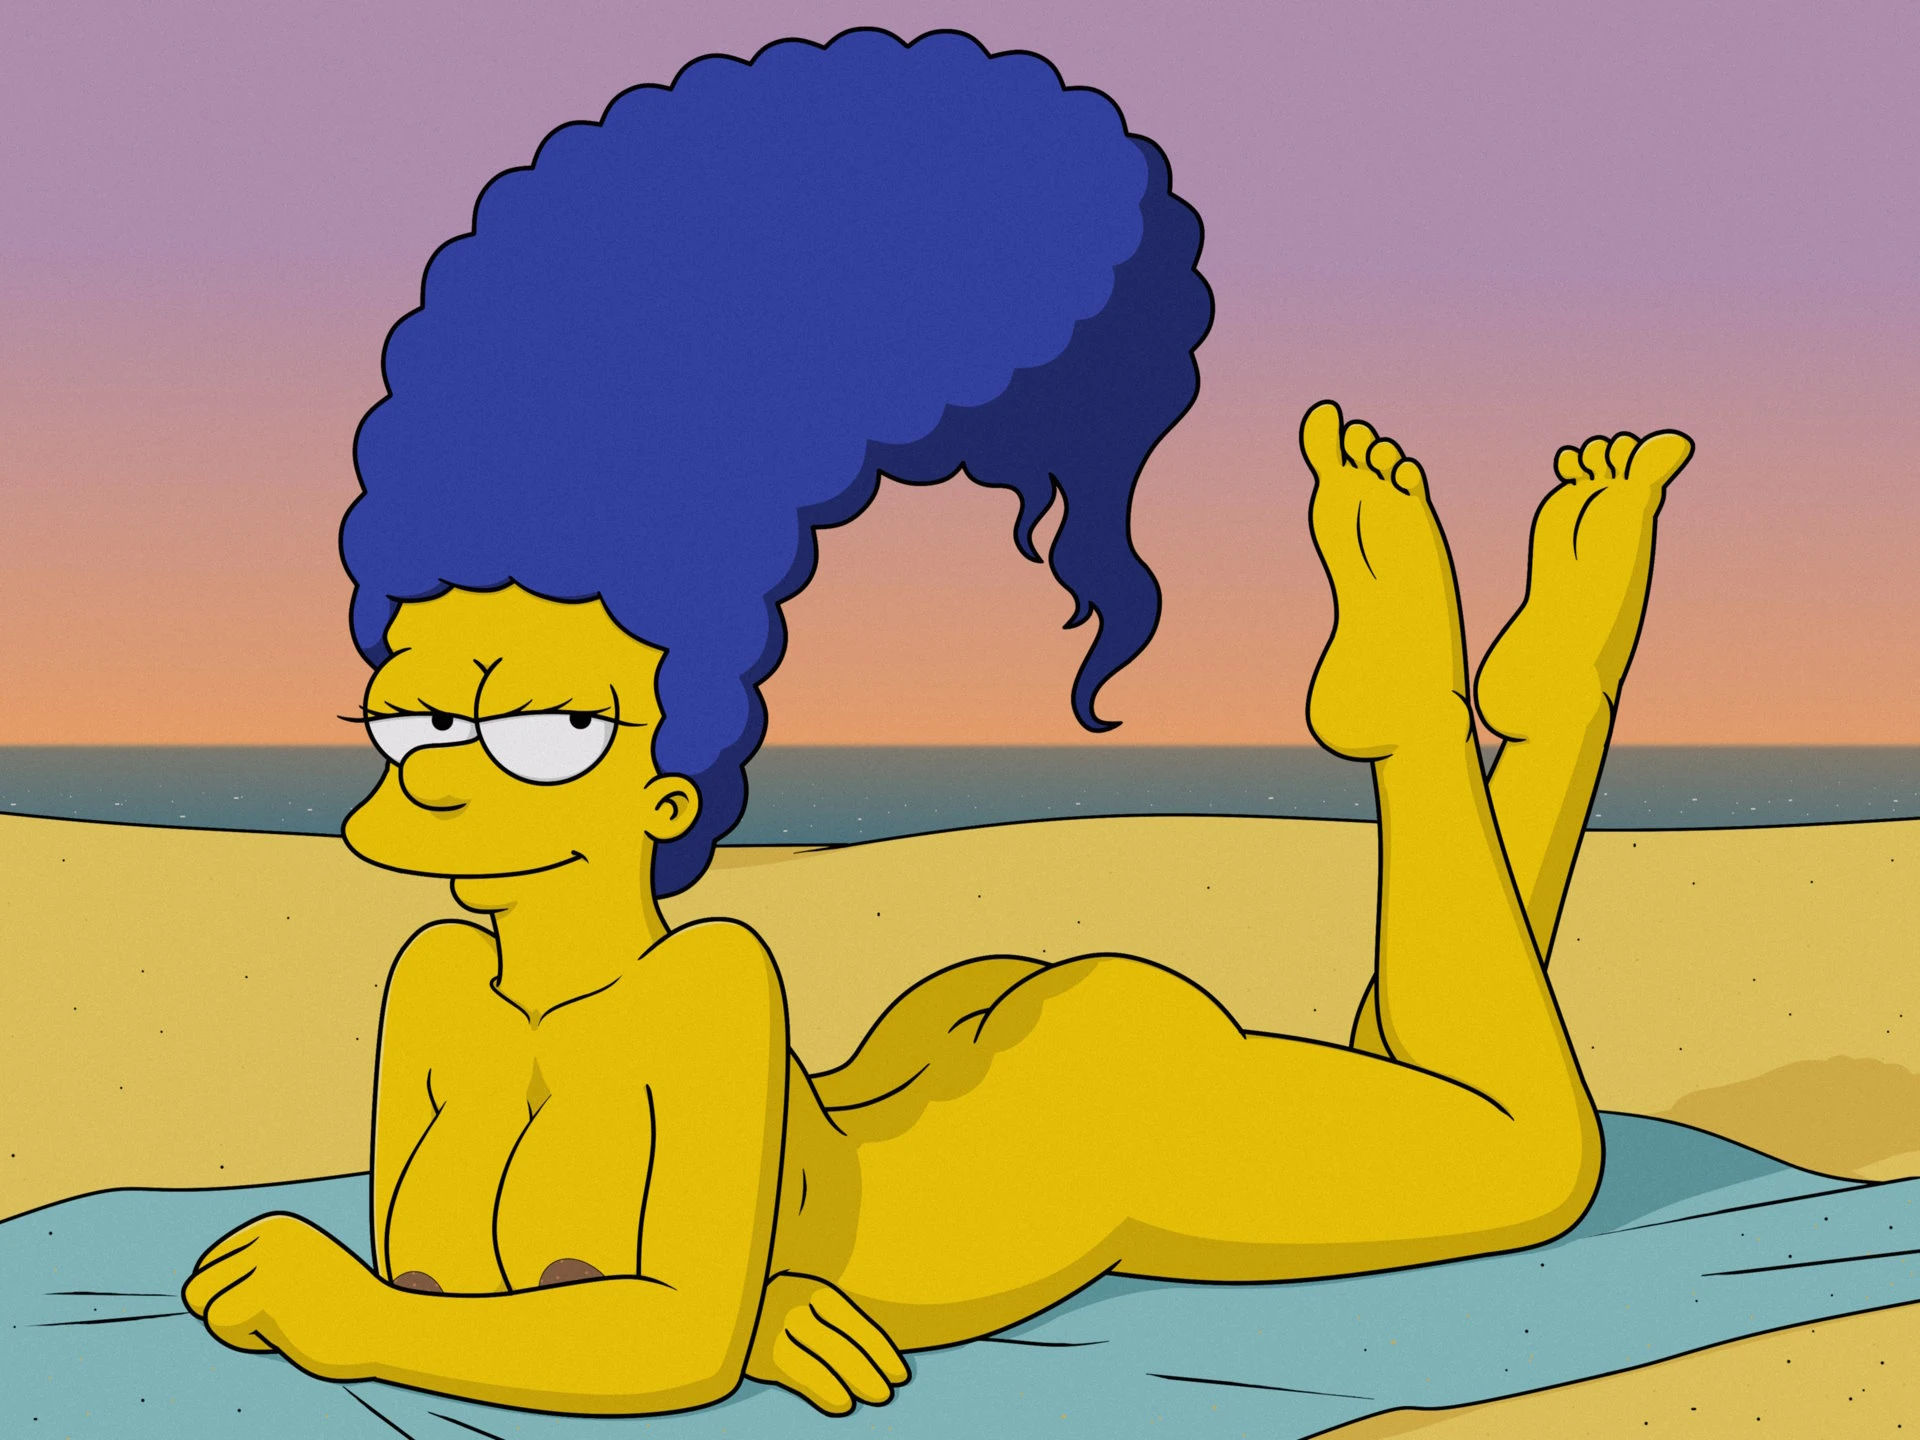 charles lan recommends marge and the nude beach pic